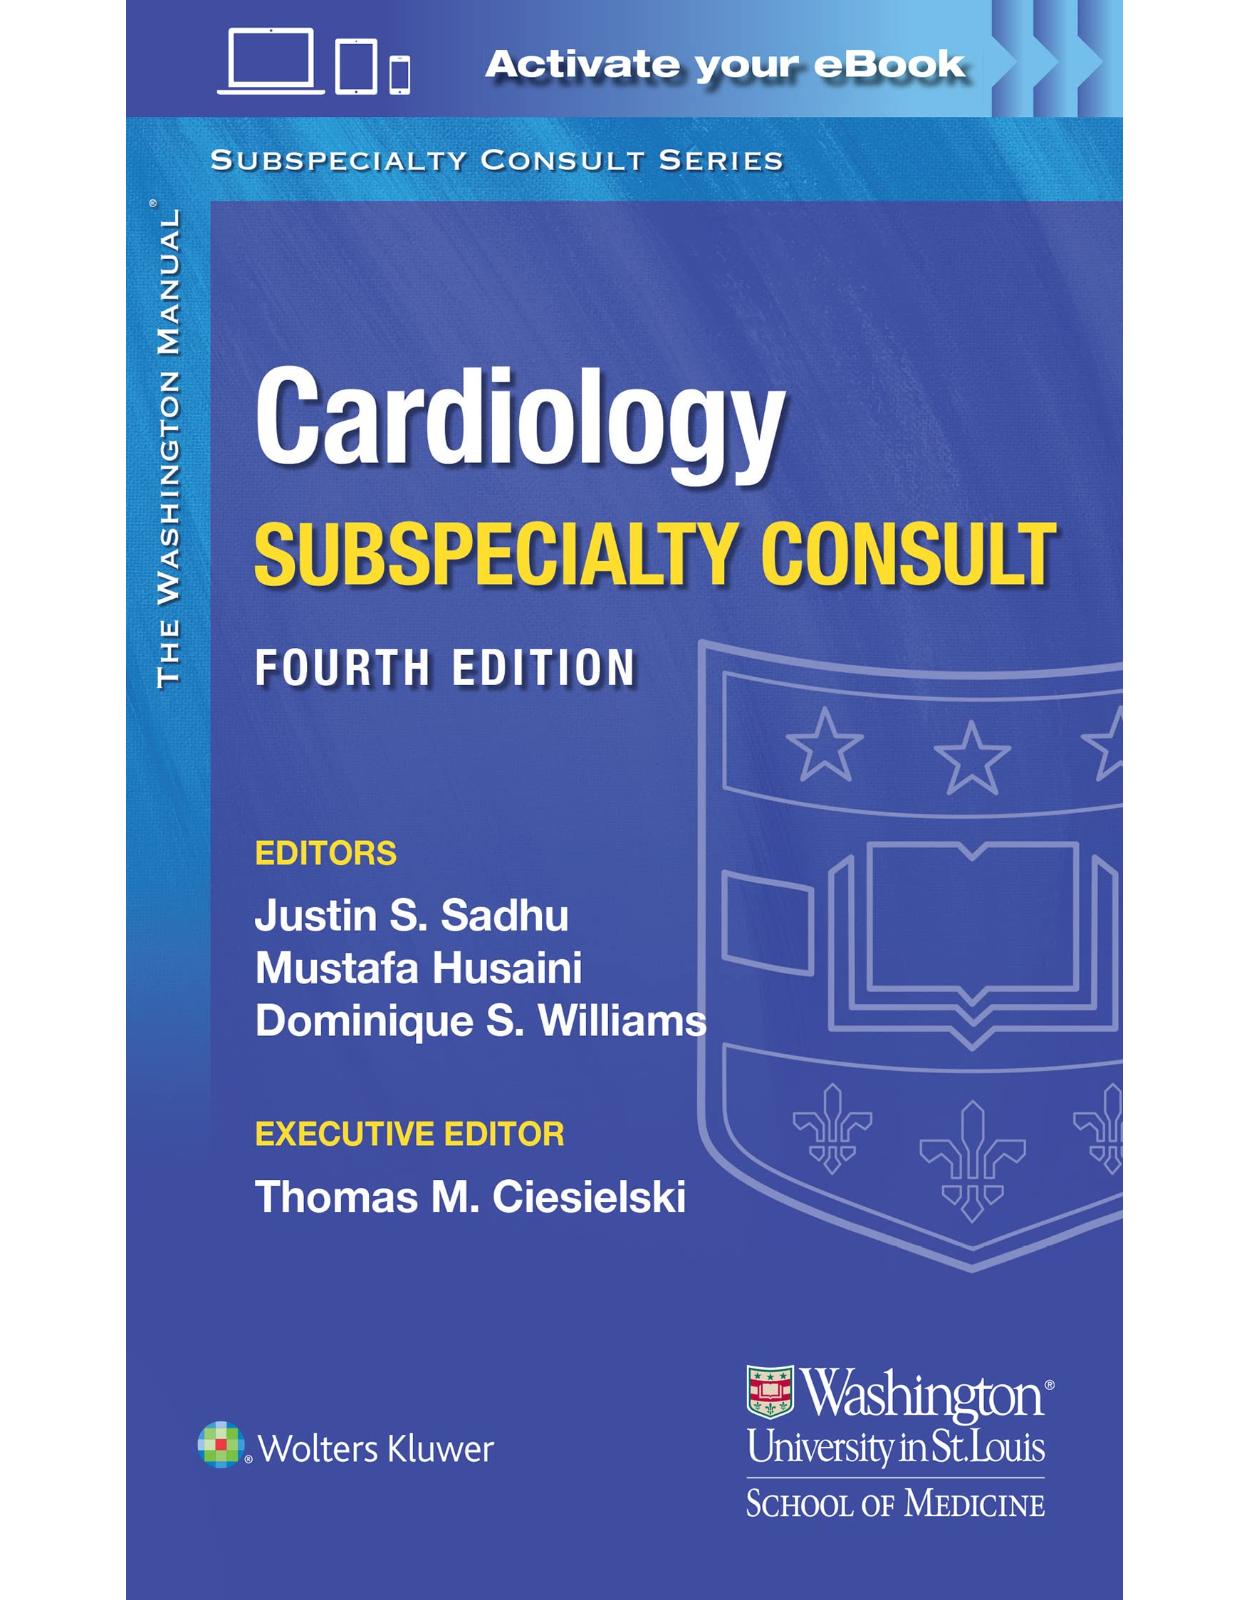 The Washington Manual Cardiology Subspecialty Consult